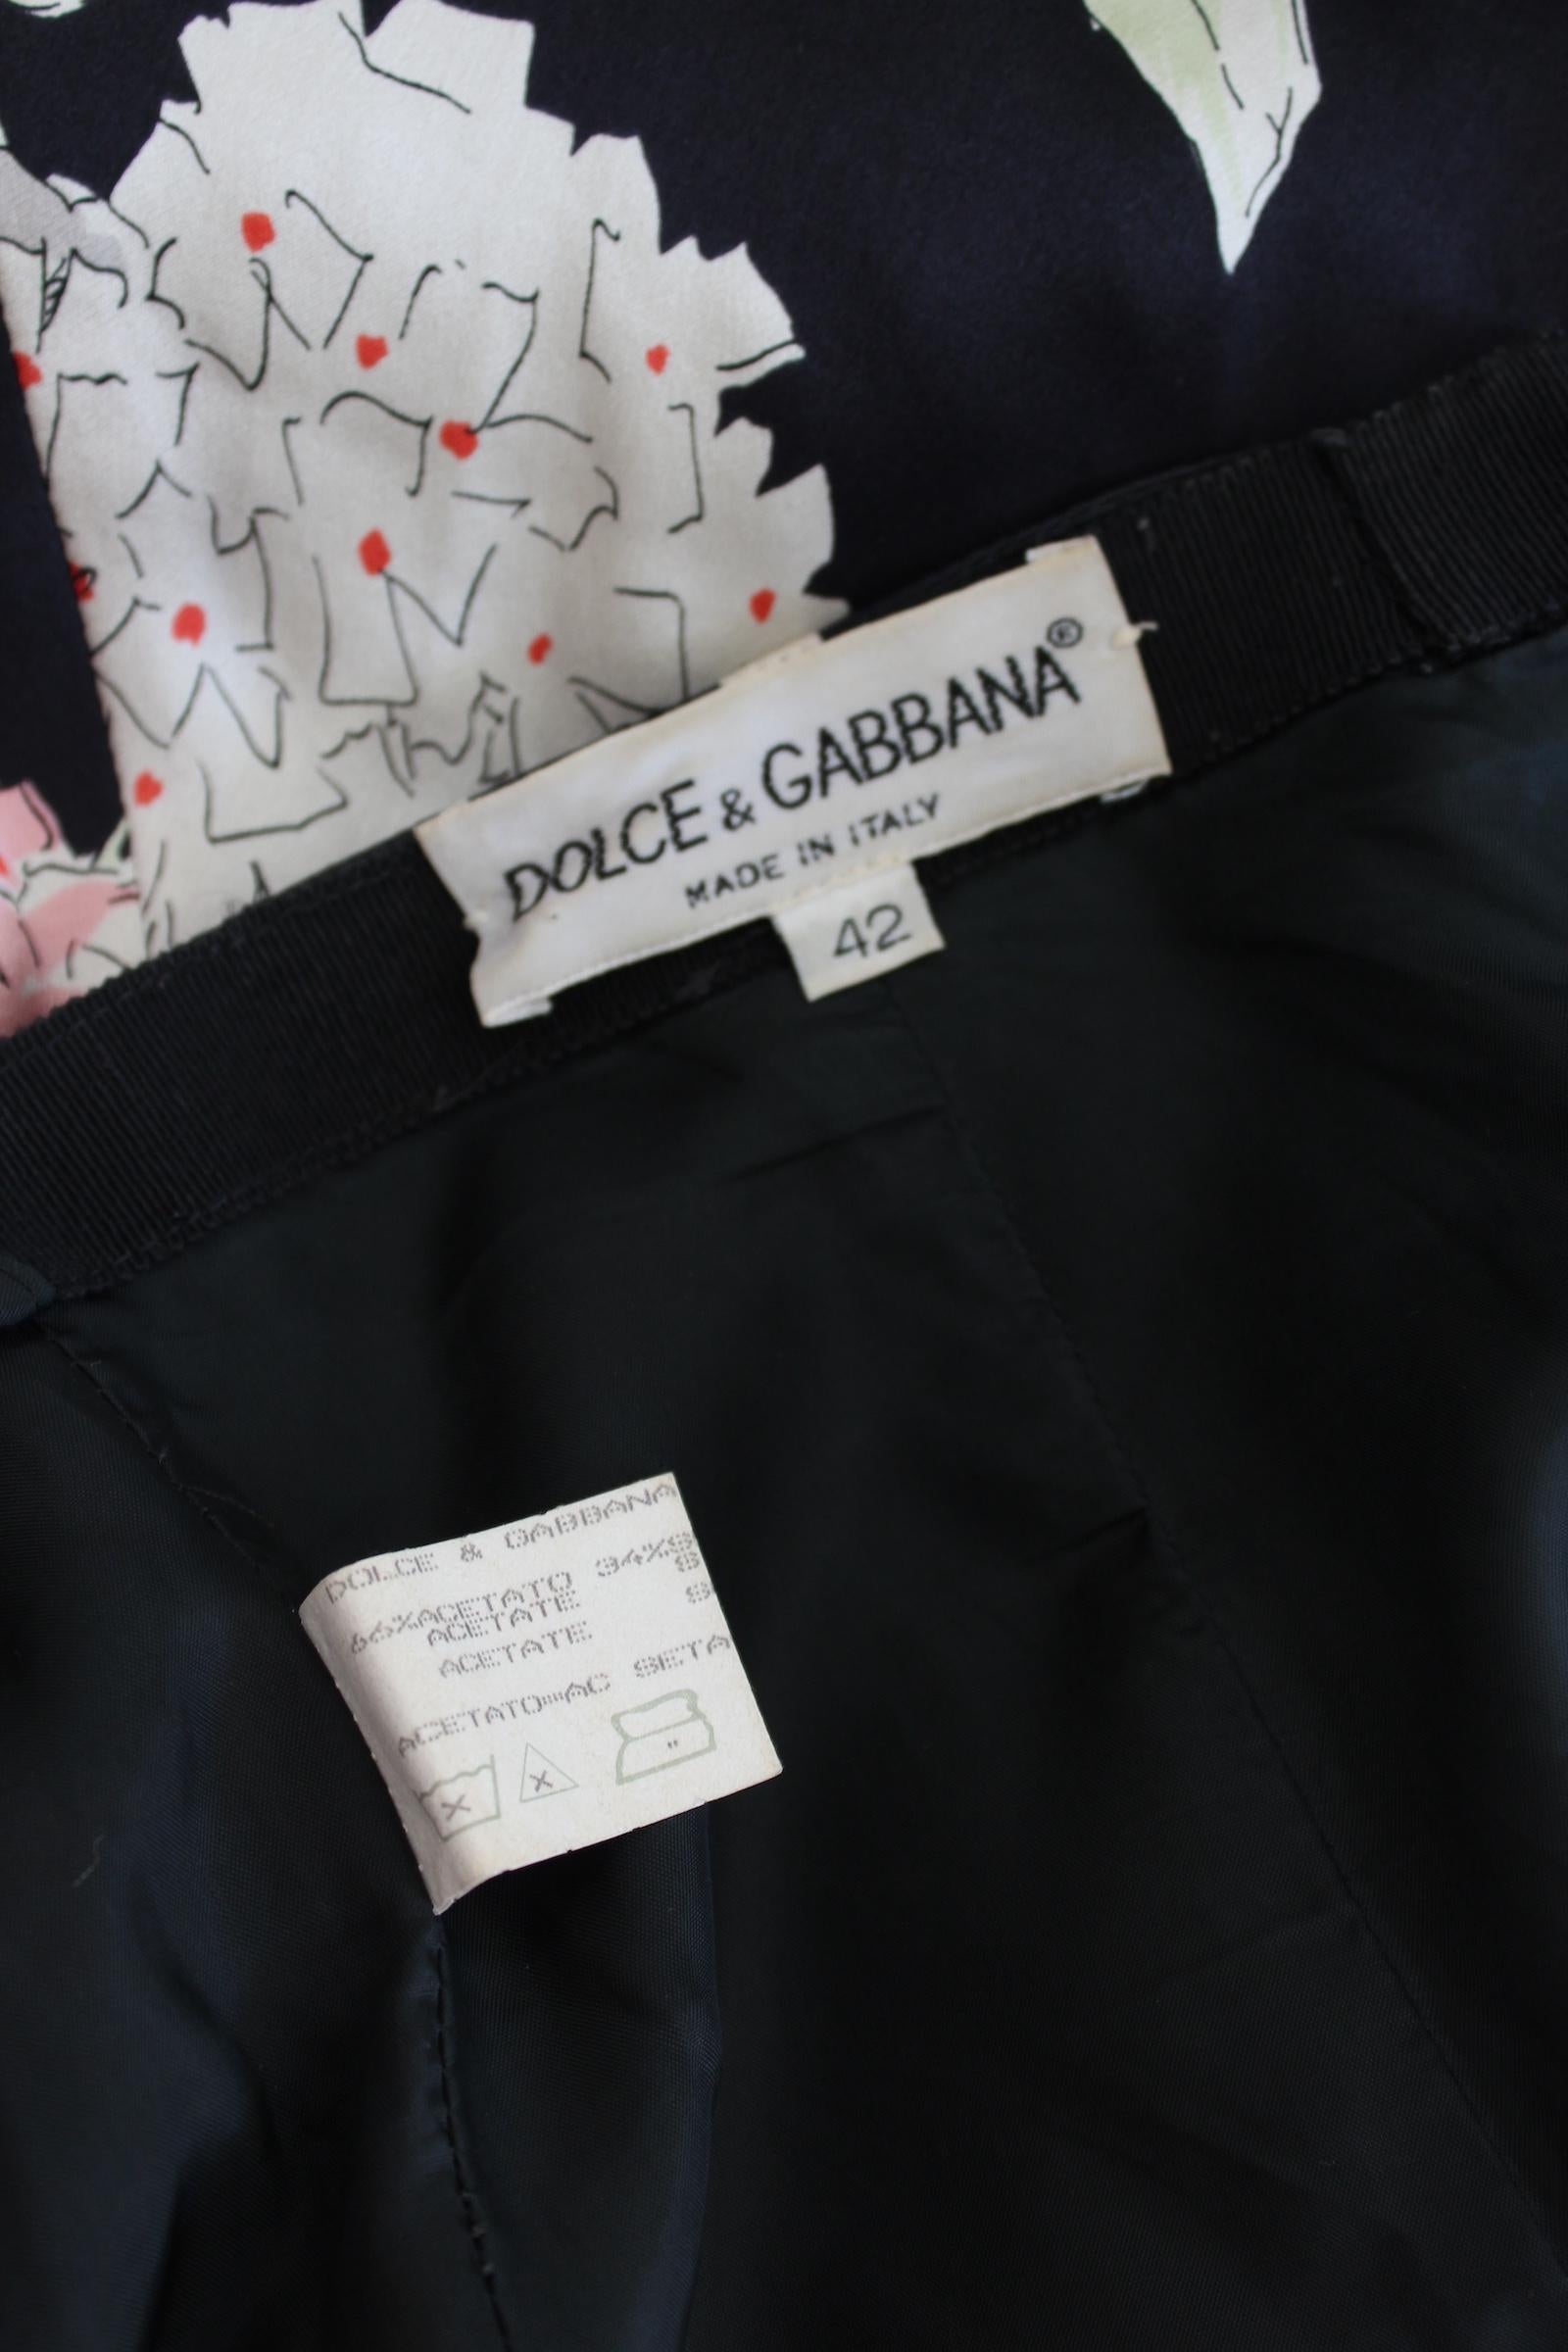 Dolce & Gabbana elegant 2000s floral dress. Short dress, sleeveless, halter neckline, flared skirt. Black background color with pink, beige and red floral pattern. Zip closure on the skirt. Composition 66% acetato, 34% silk. Made in Italy.

Size: 42